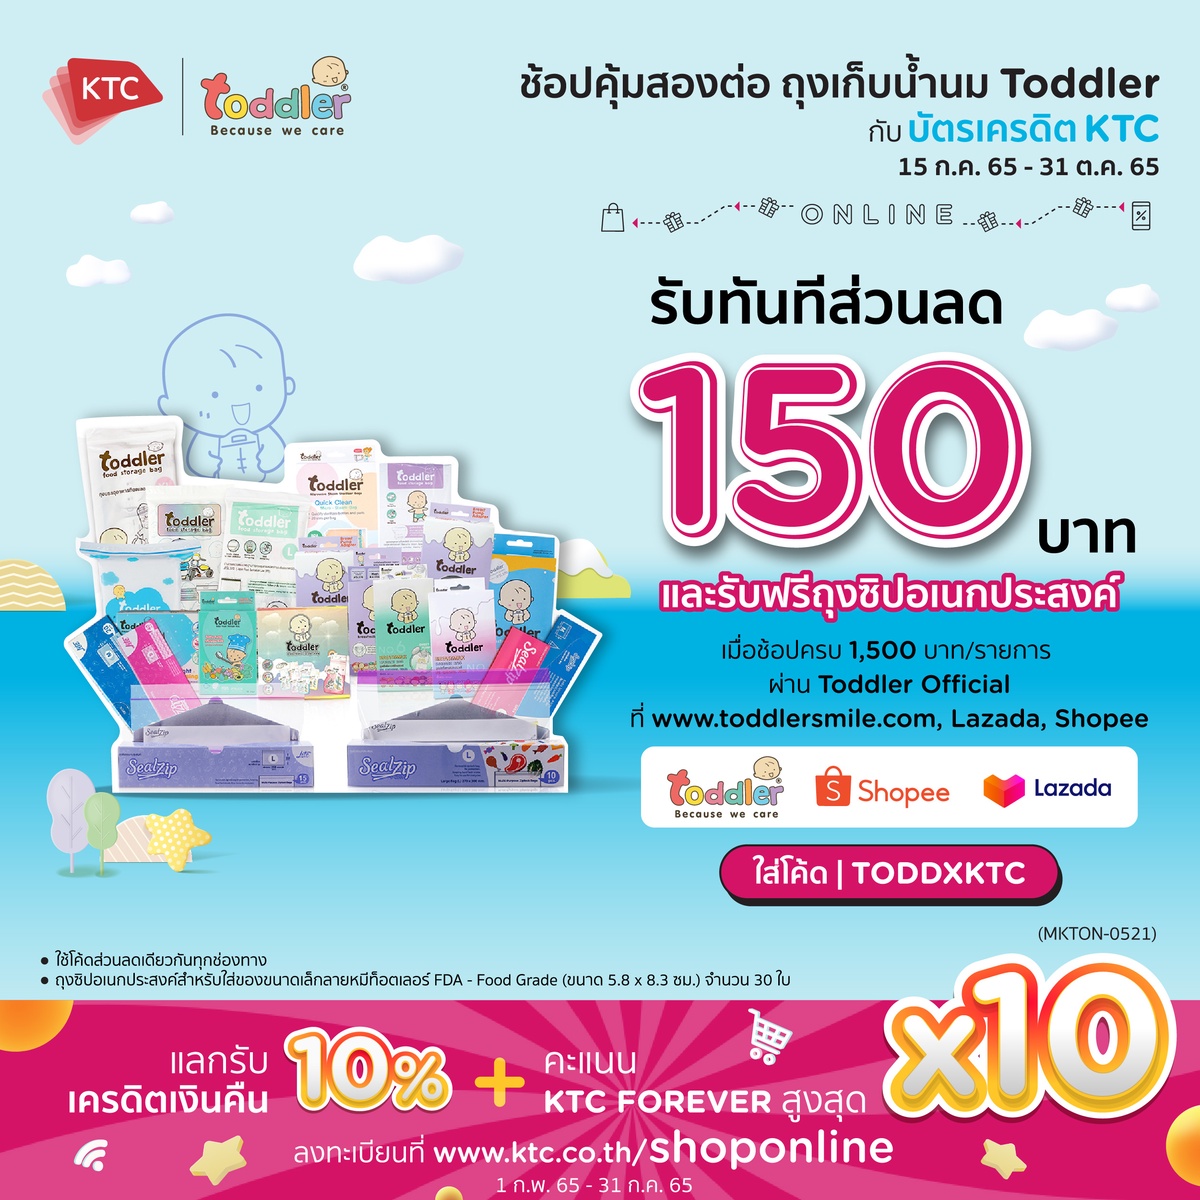 KTC-Toddler pleases mothers by offering value deals and free Toddler multipurpose zipper bags for online orders